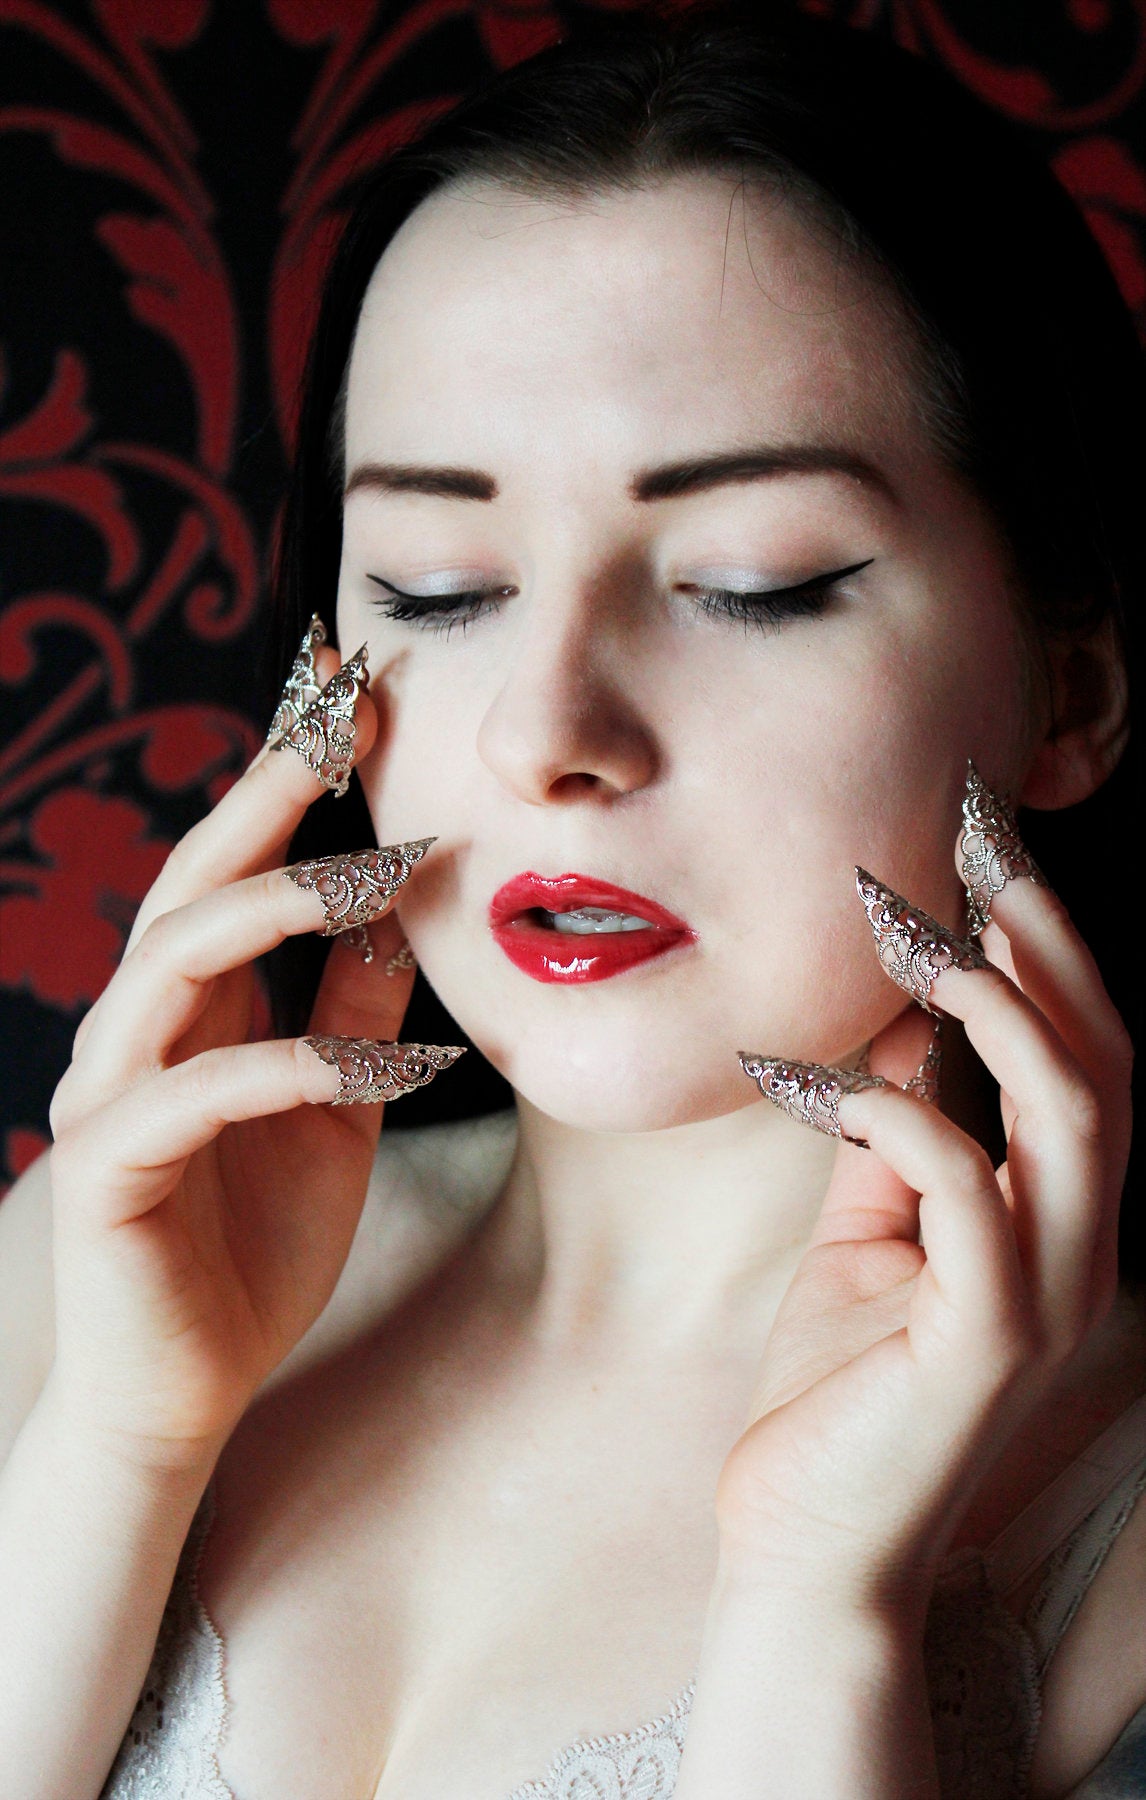 A serene portrait of a woman with closed eyes, her delicate features accentuated by Myril Jewels' goth nail rings. The silver filigree claws add a touch of neo-gothic charm, perfect for someone who cherishes Halloween and punk aesthetics, and values bold, whimsigoth jewelry as part of their everyday attire or for special events